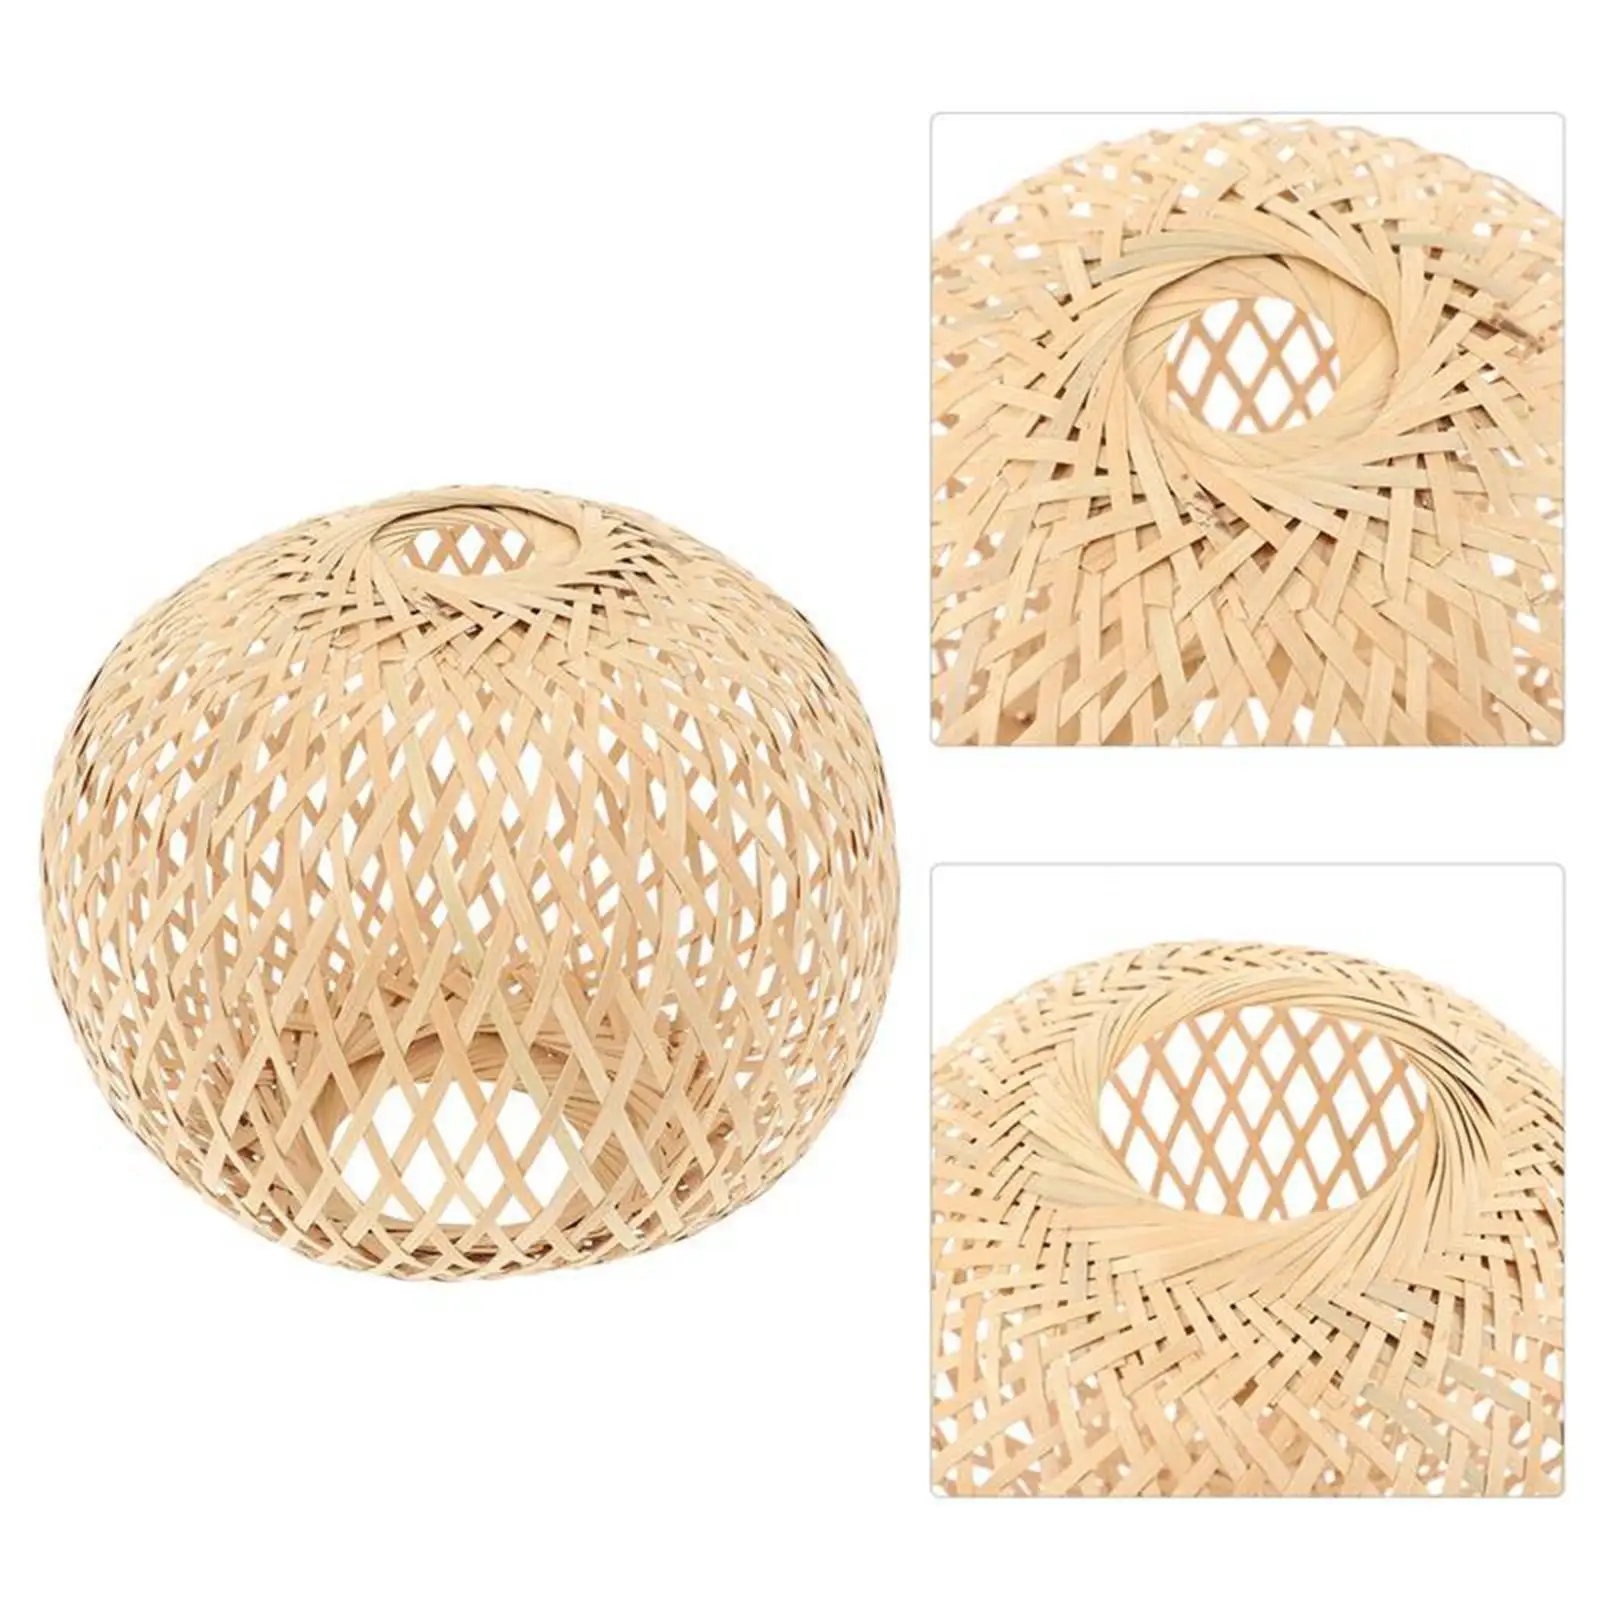 

Bamboo Woven Lampshade Handwoven Rustic for Kitchen Island Teahouse 21x20cm